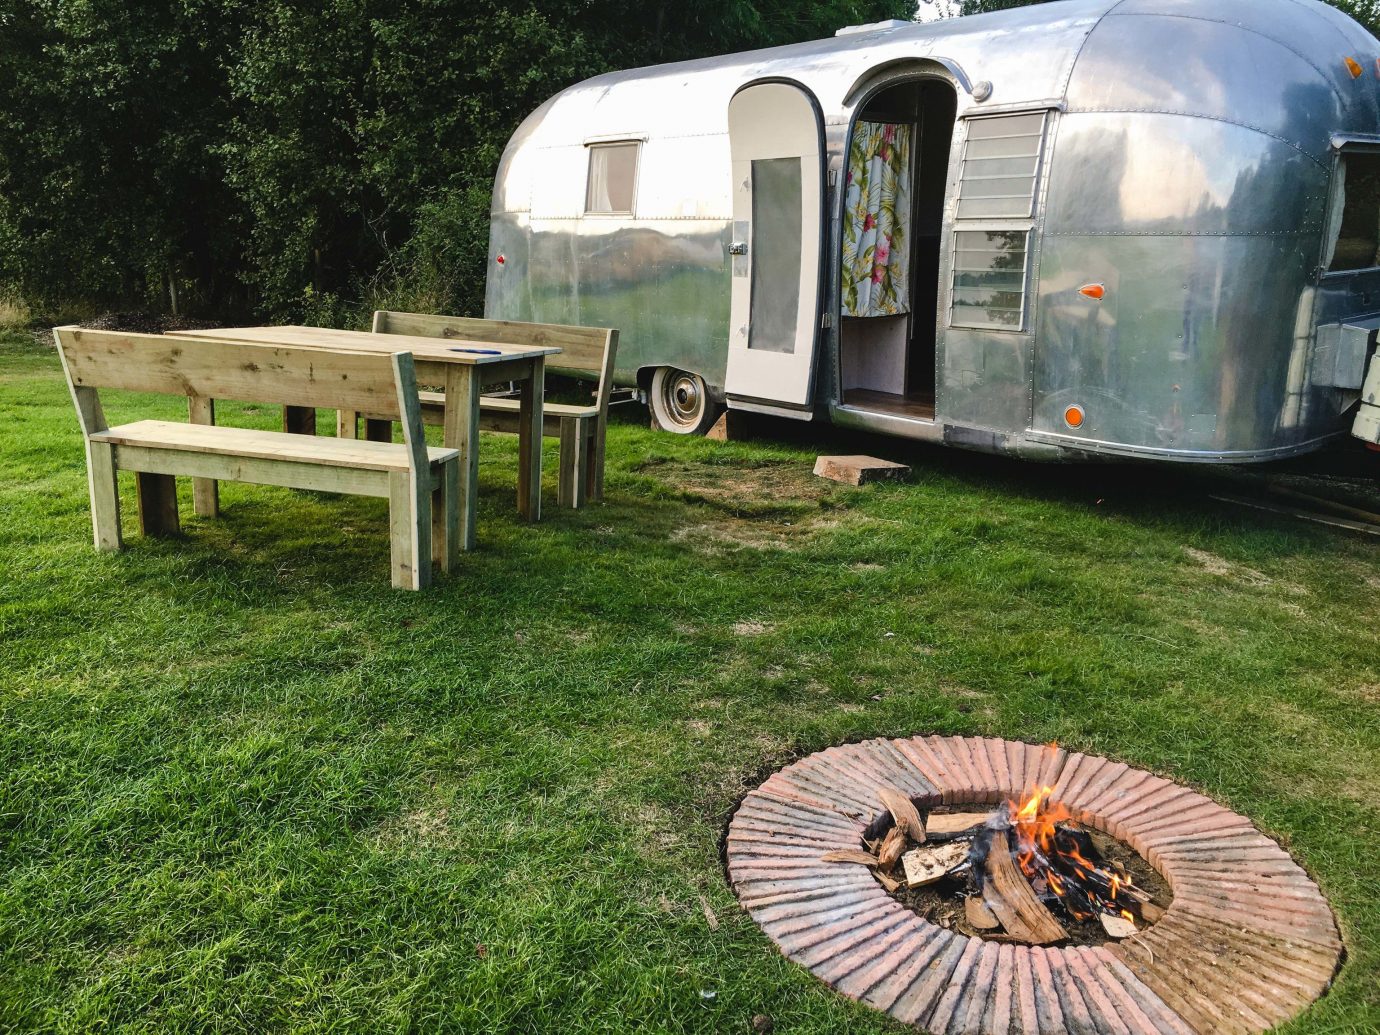 Glamping Outdoors + Adventure Trip Ideas grass outdoor tree camping vehicle travel trailer trailer park caravan motor vehicle automotive exterior recreation lawn plant community